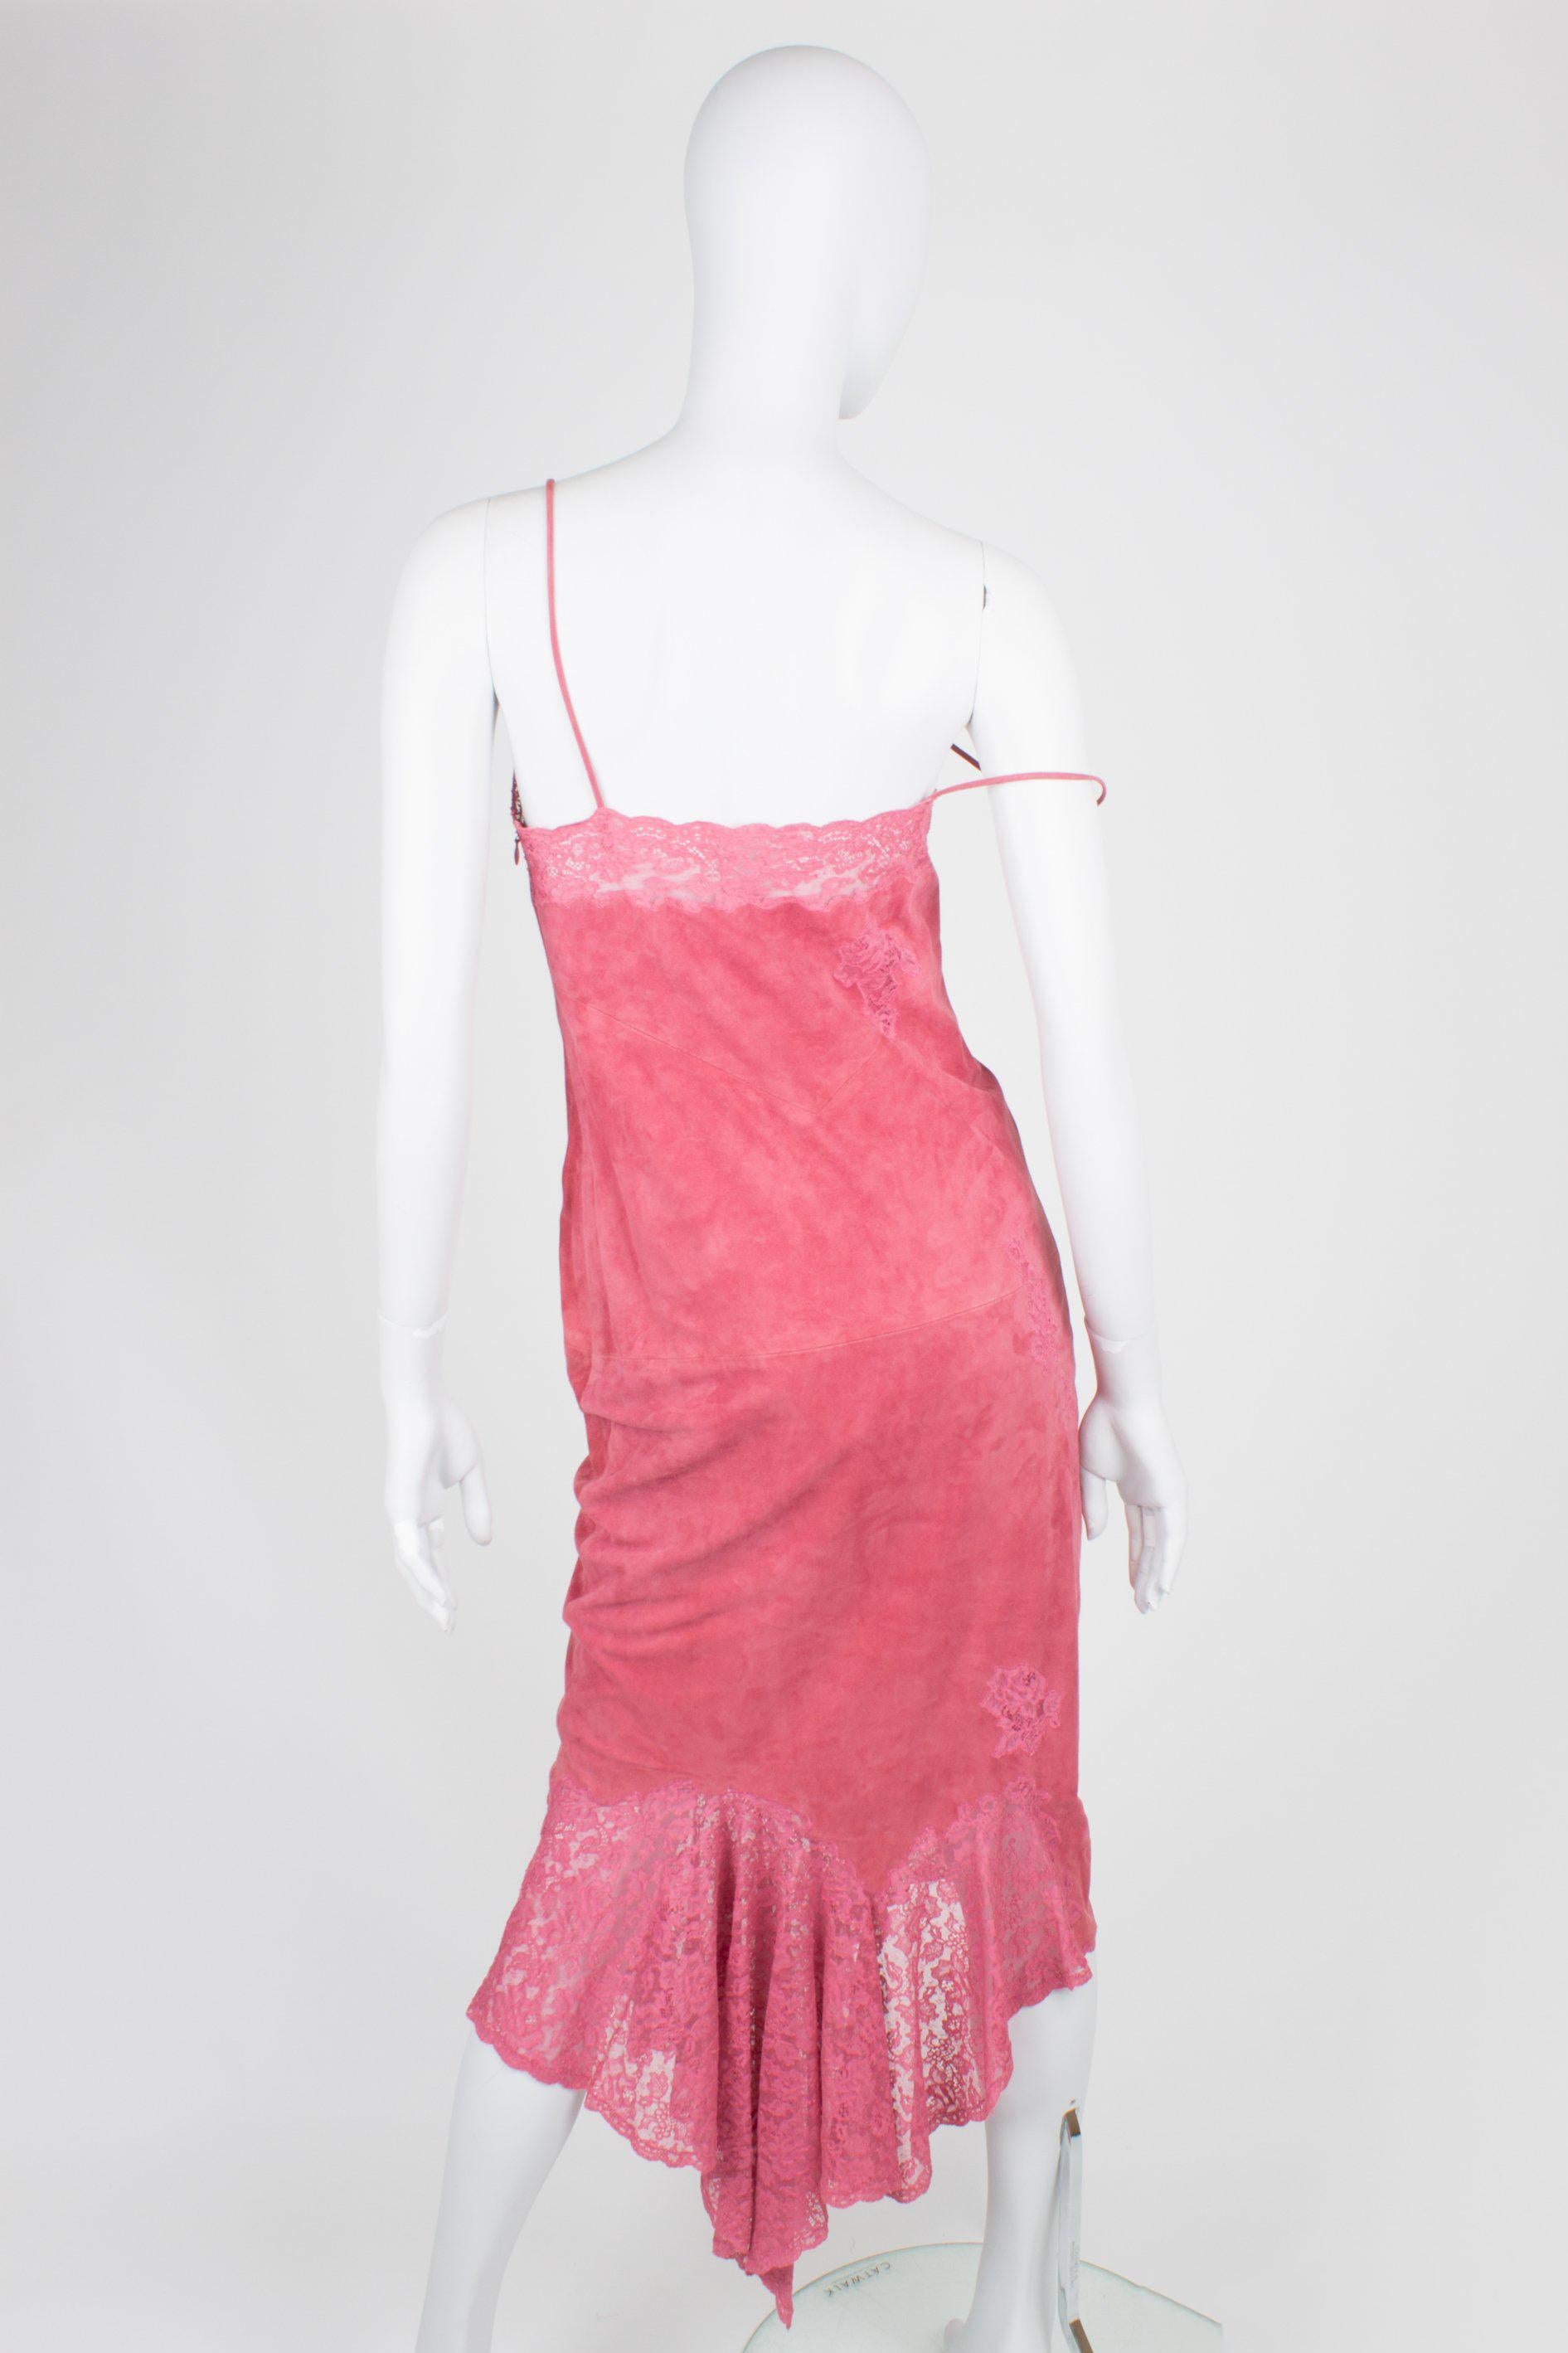 Women's Christian Dior Dress & Jacket - pink suede For Sale